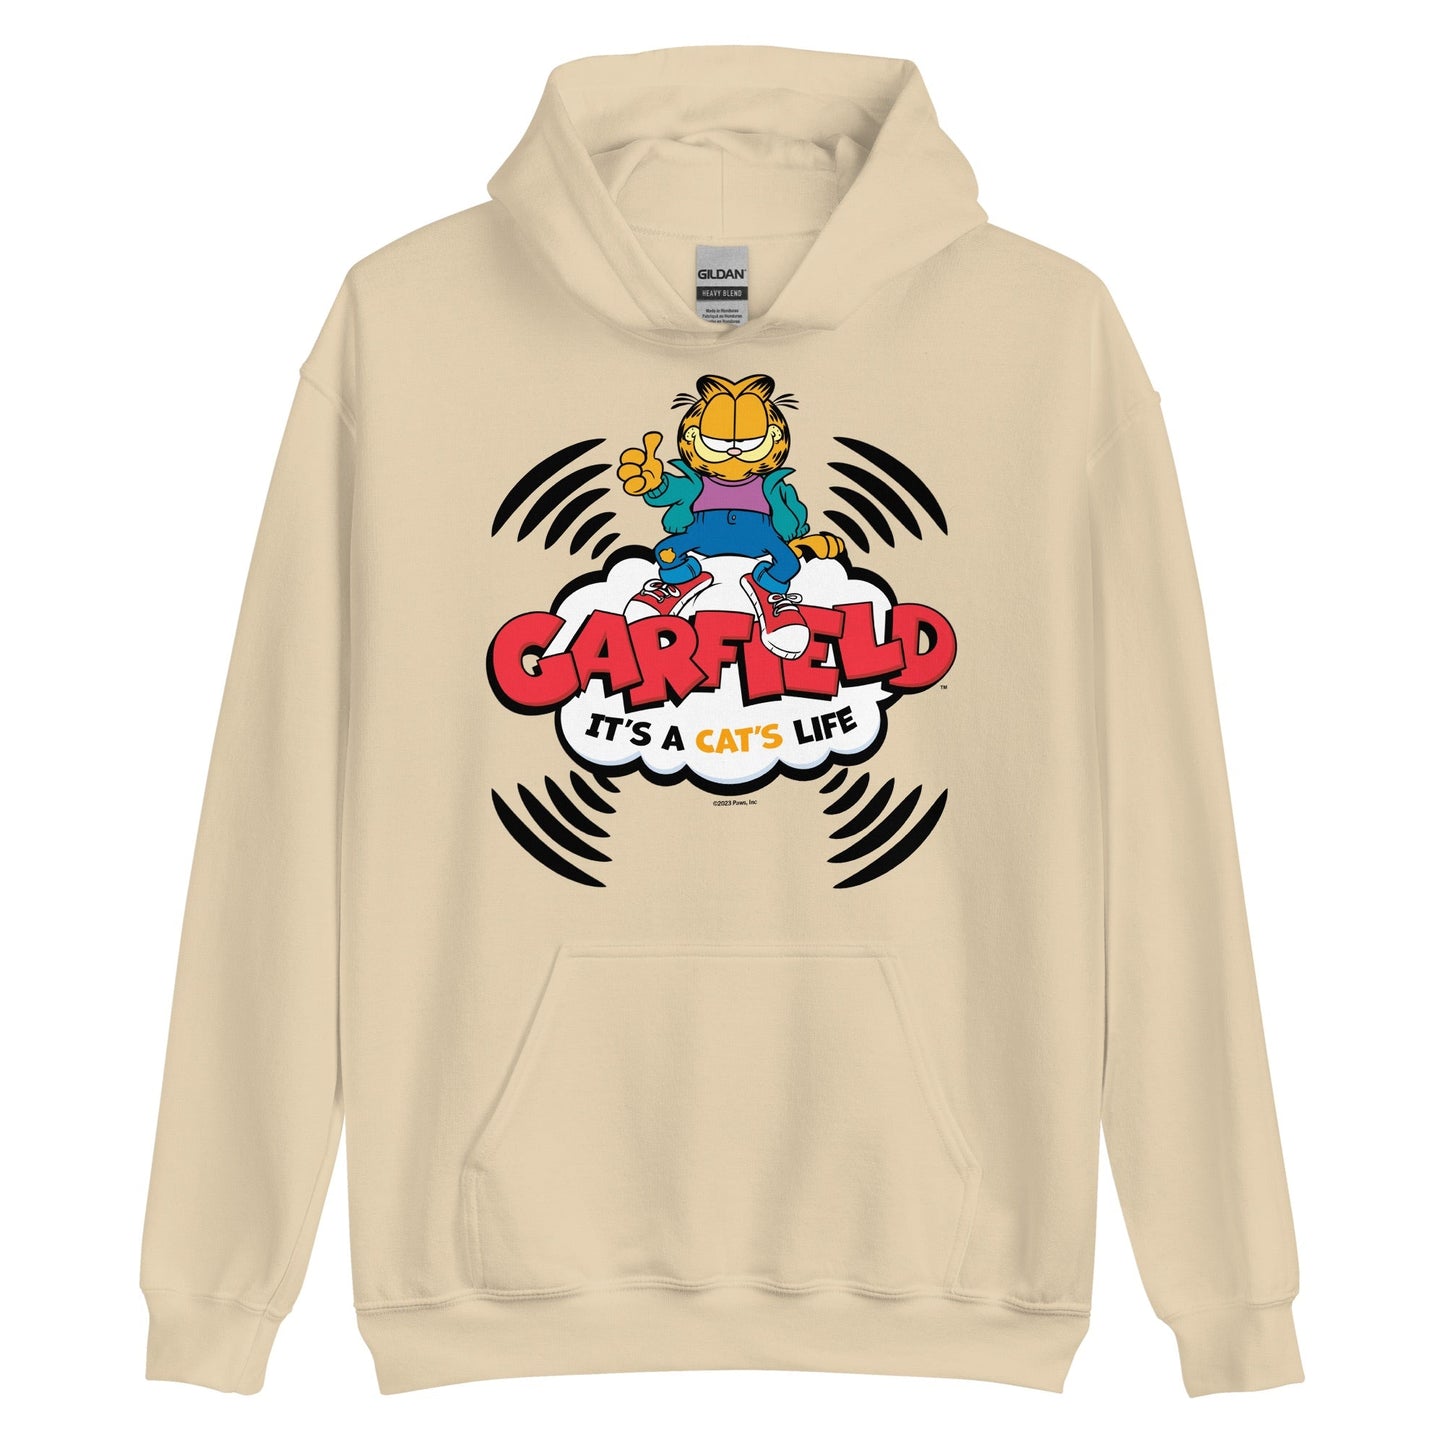 Garfield It's A Cats Life Hoodie - Paramount Shop